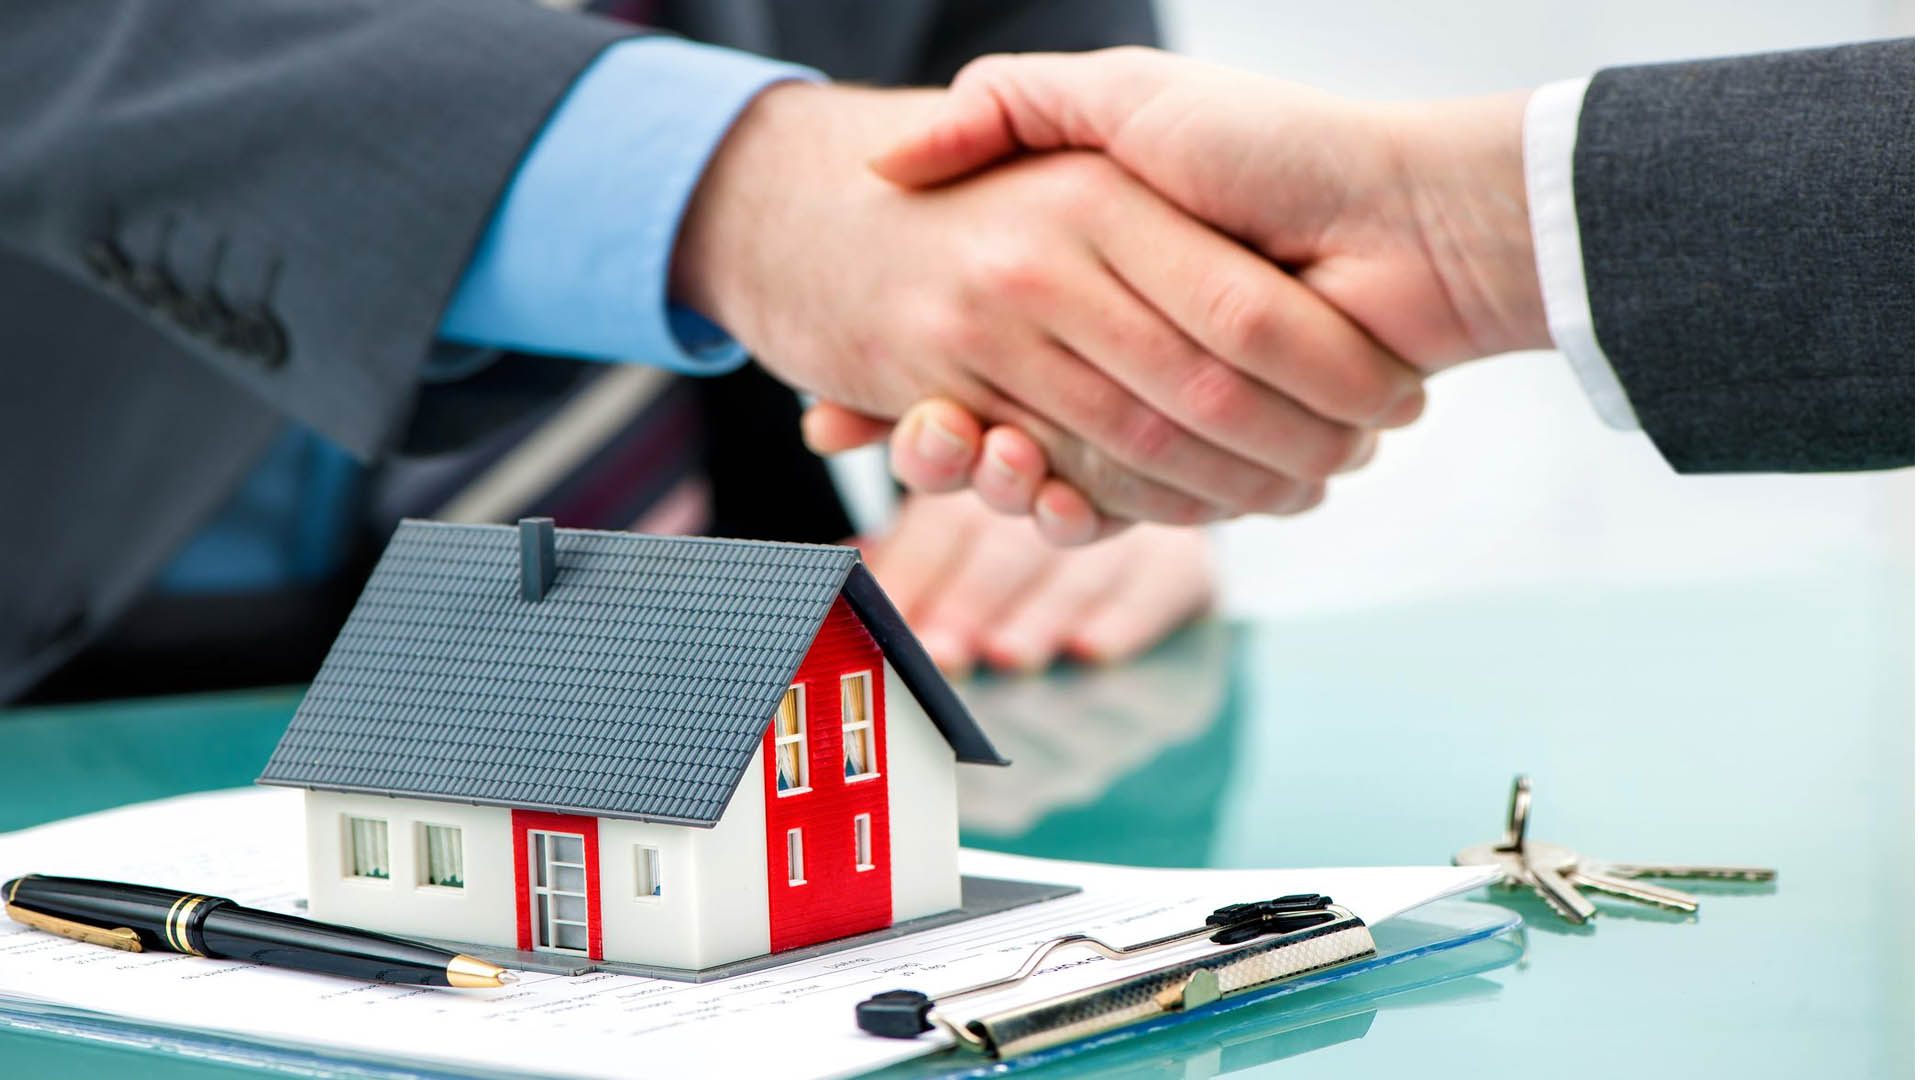 How to choose a good Real Estate Agent?